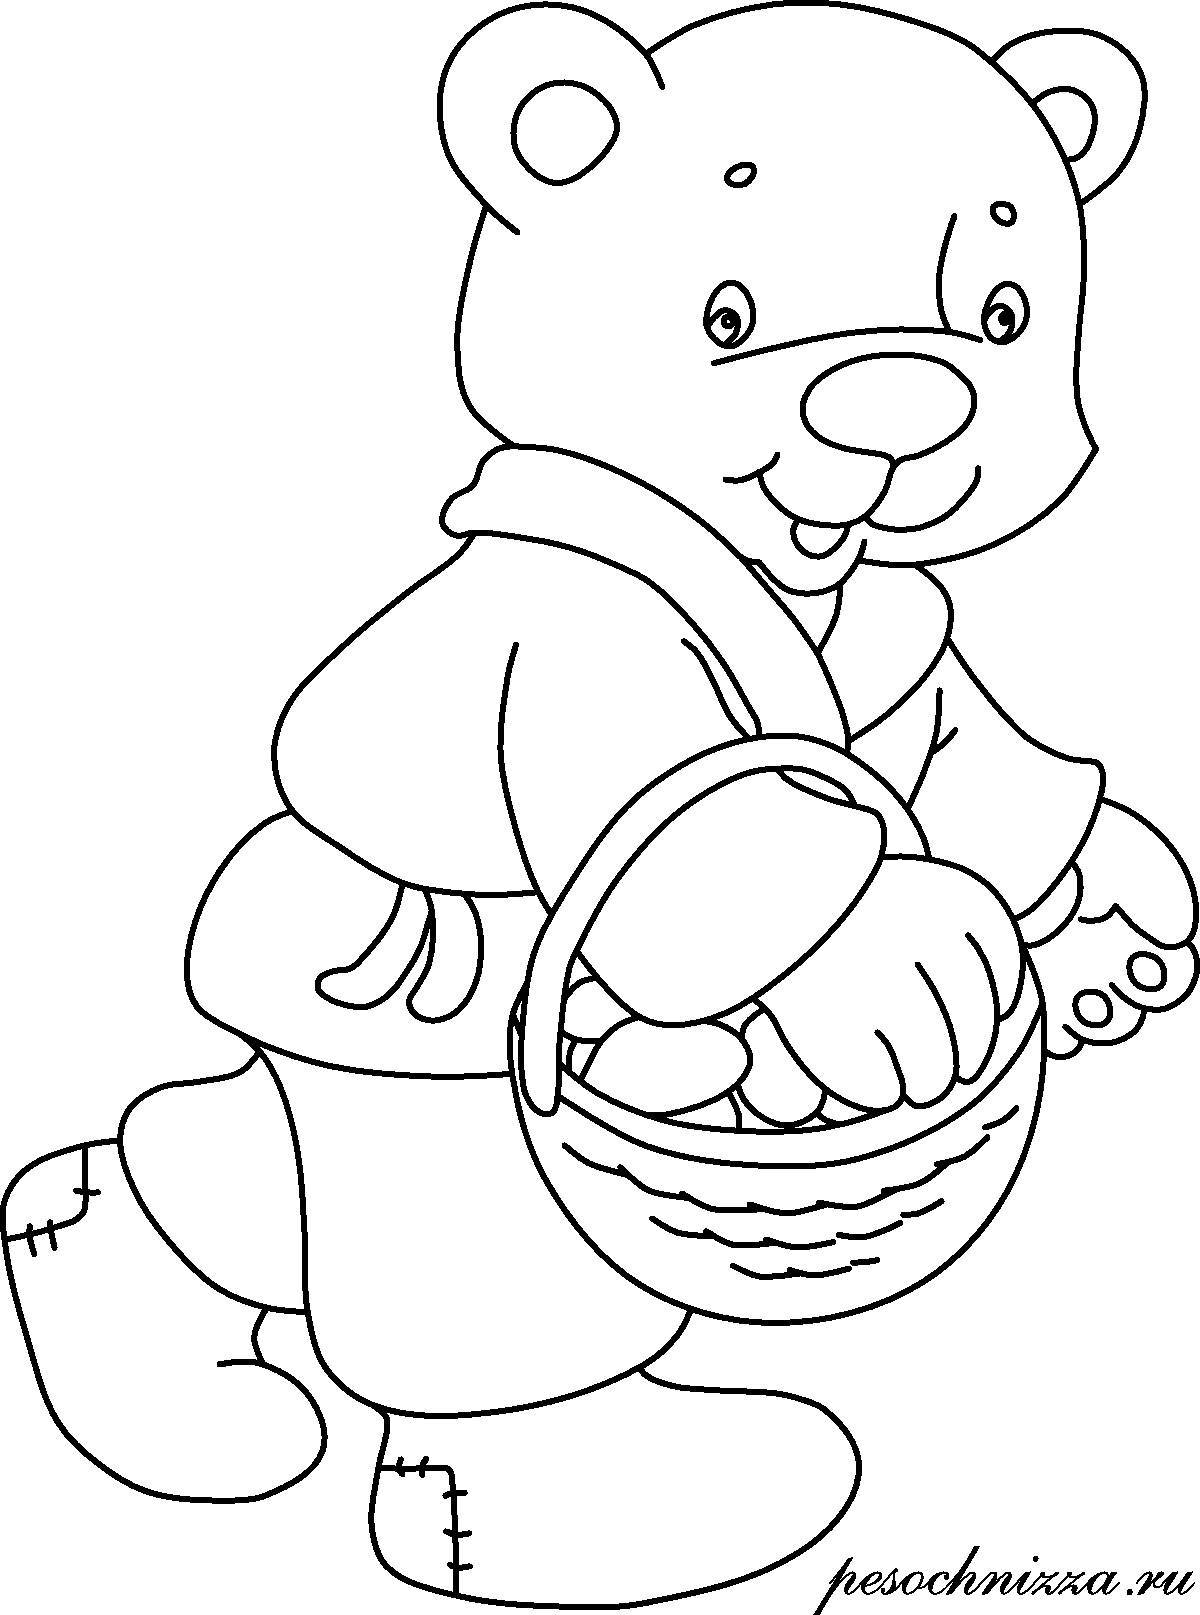 Essential fairy tale coloring pages